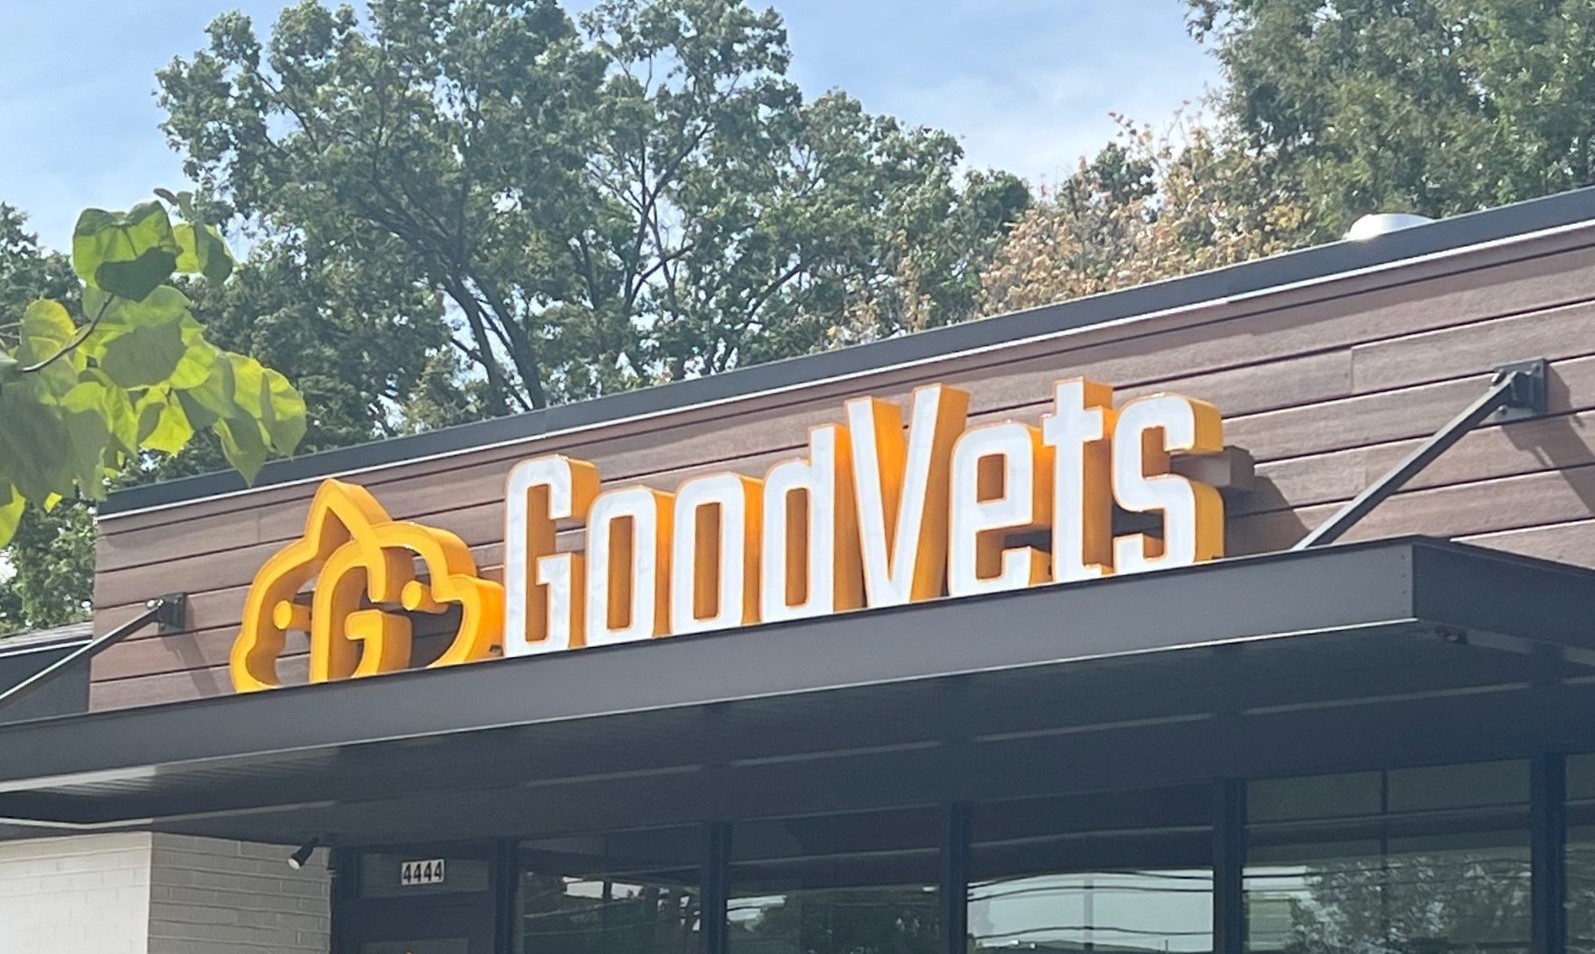 Channel Letter Signage for GoodVets of Charlotte – JC Signs 2022